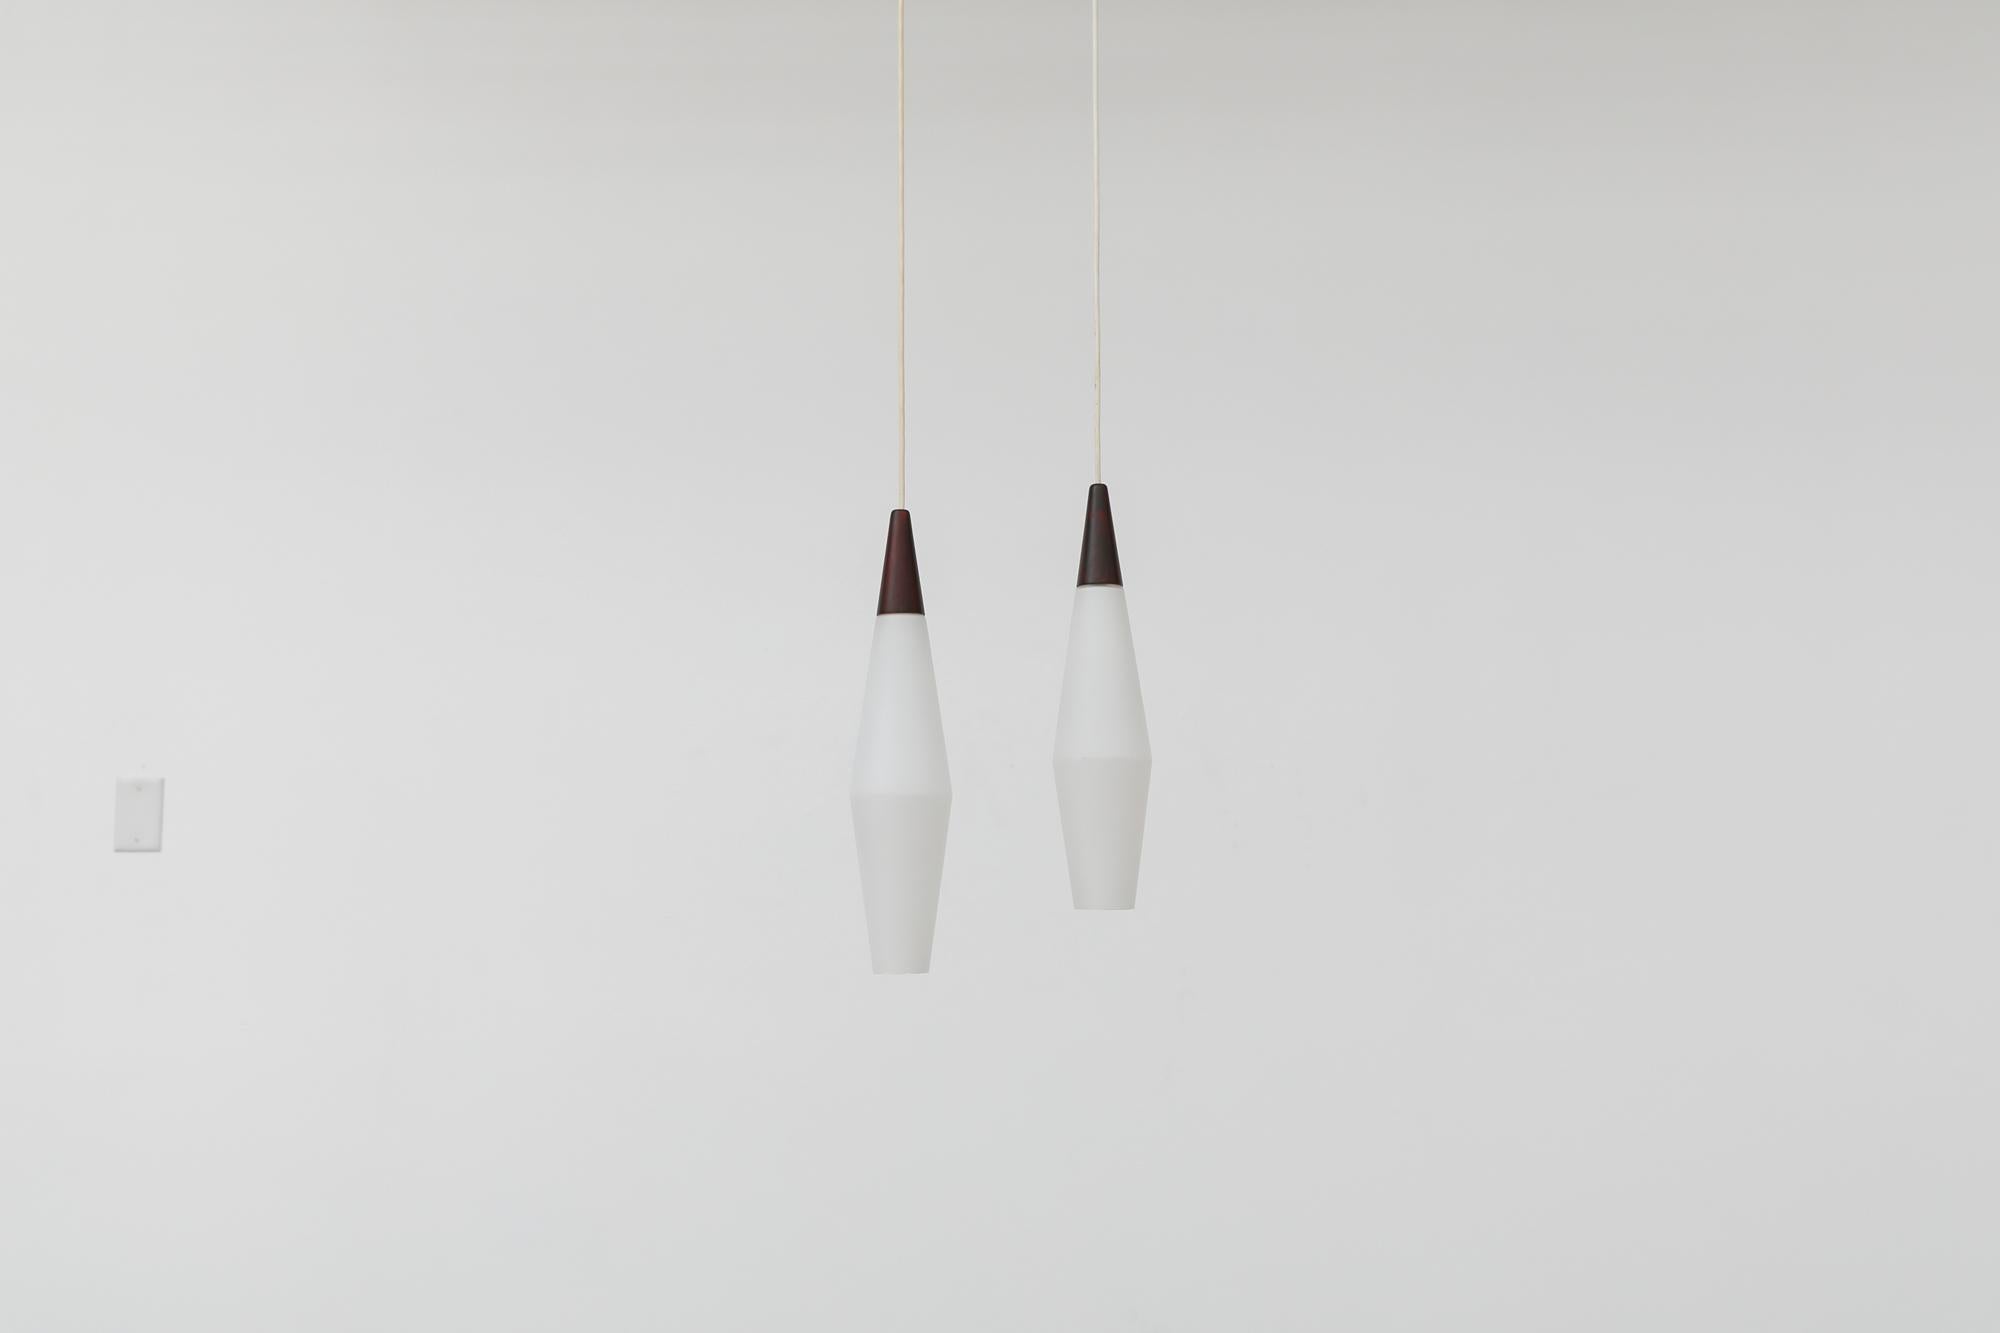 Pair of Mid-Century, Louis Kalff attributed, Philips manufactured, frosted opaline milk glass pendant lights with faux rosewood tops. In original condition with visible wear consistent with their age and use.